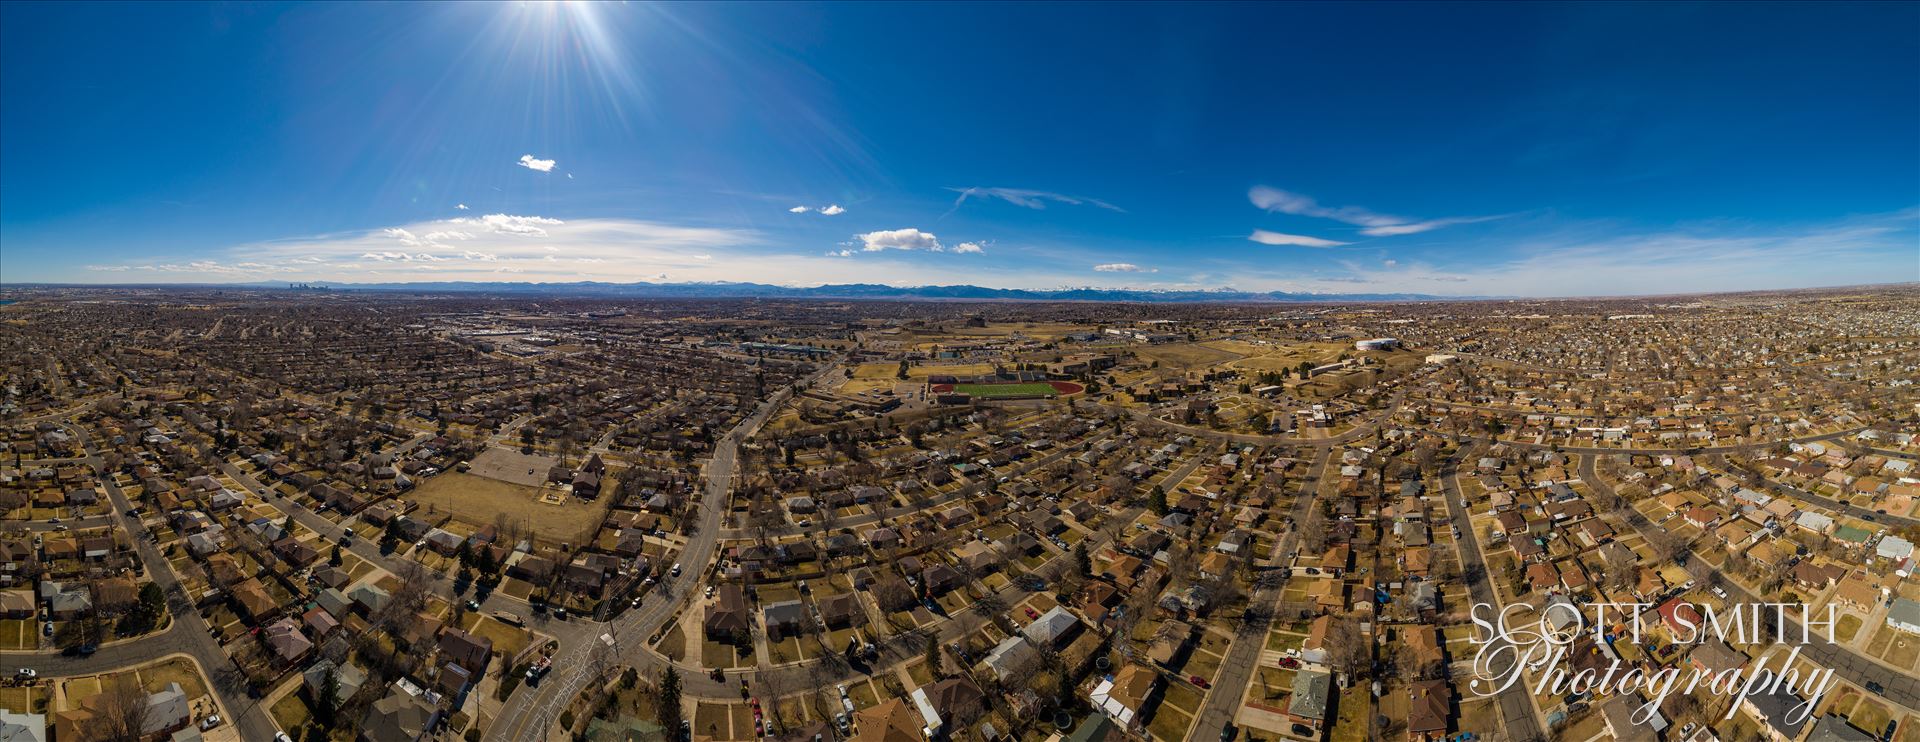 Panoramic aerial shot of Thornton, Colorado A panoramic aerial photo of Thornton, Colorado, made up of 21 separate photos. by Scott Smith Photos